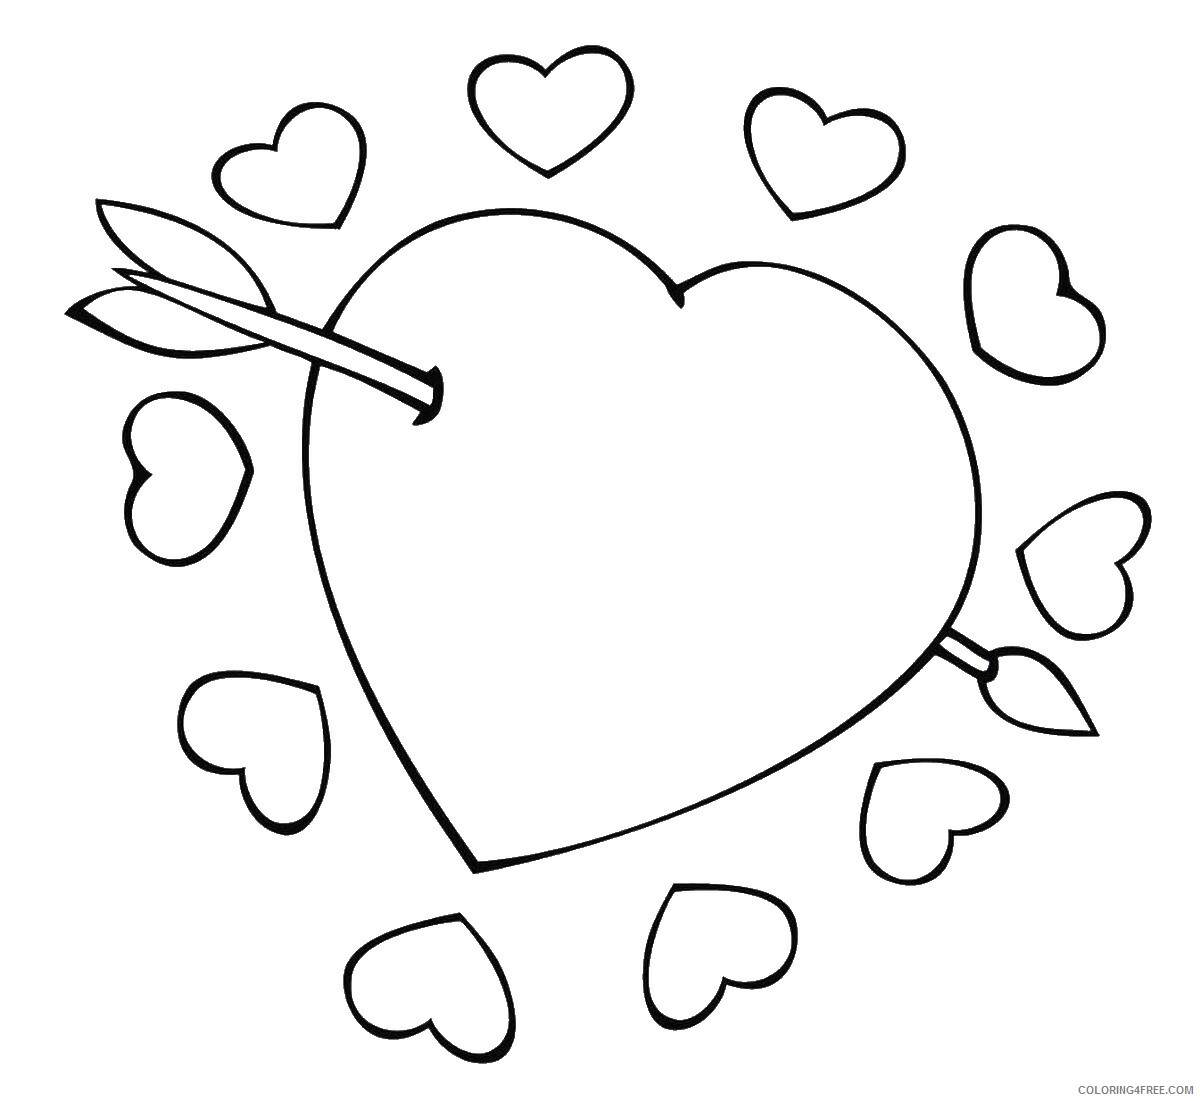 Heart Coloring Pages hearts_cl_17 Printable 2021 3177 Coloring4free